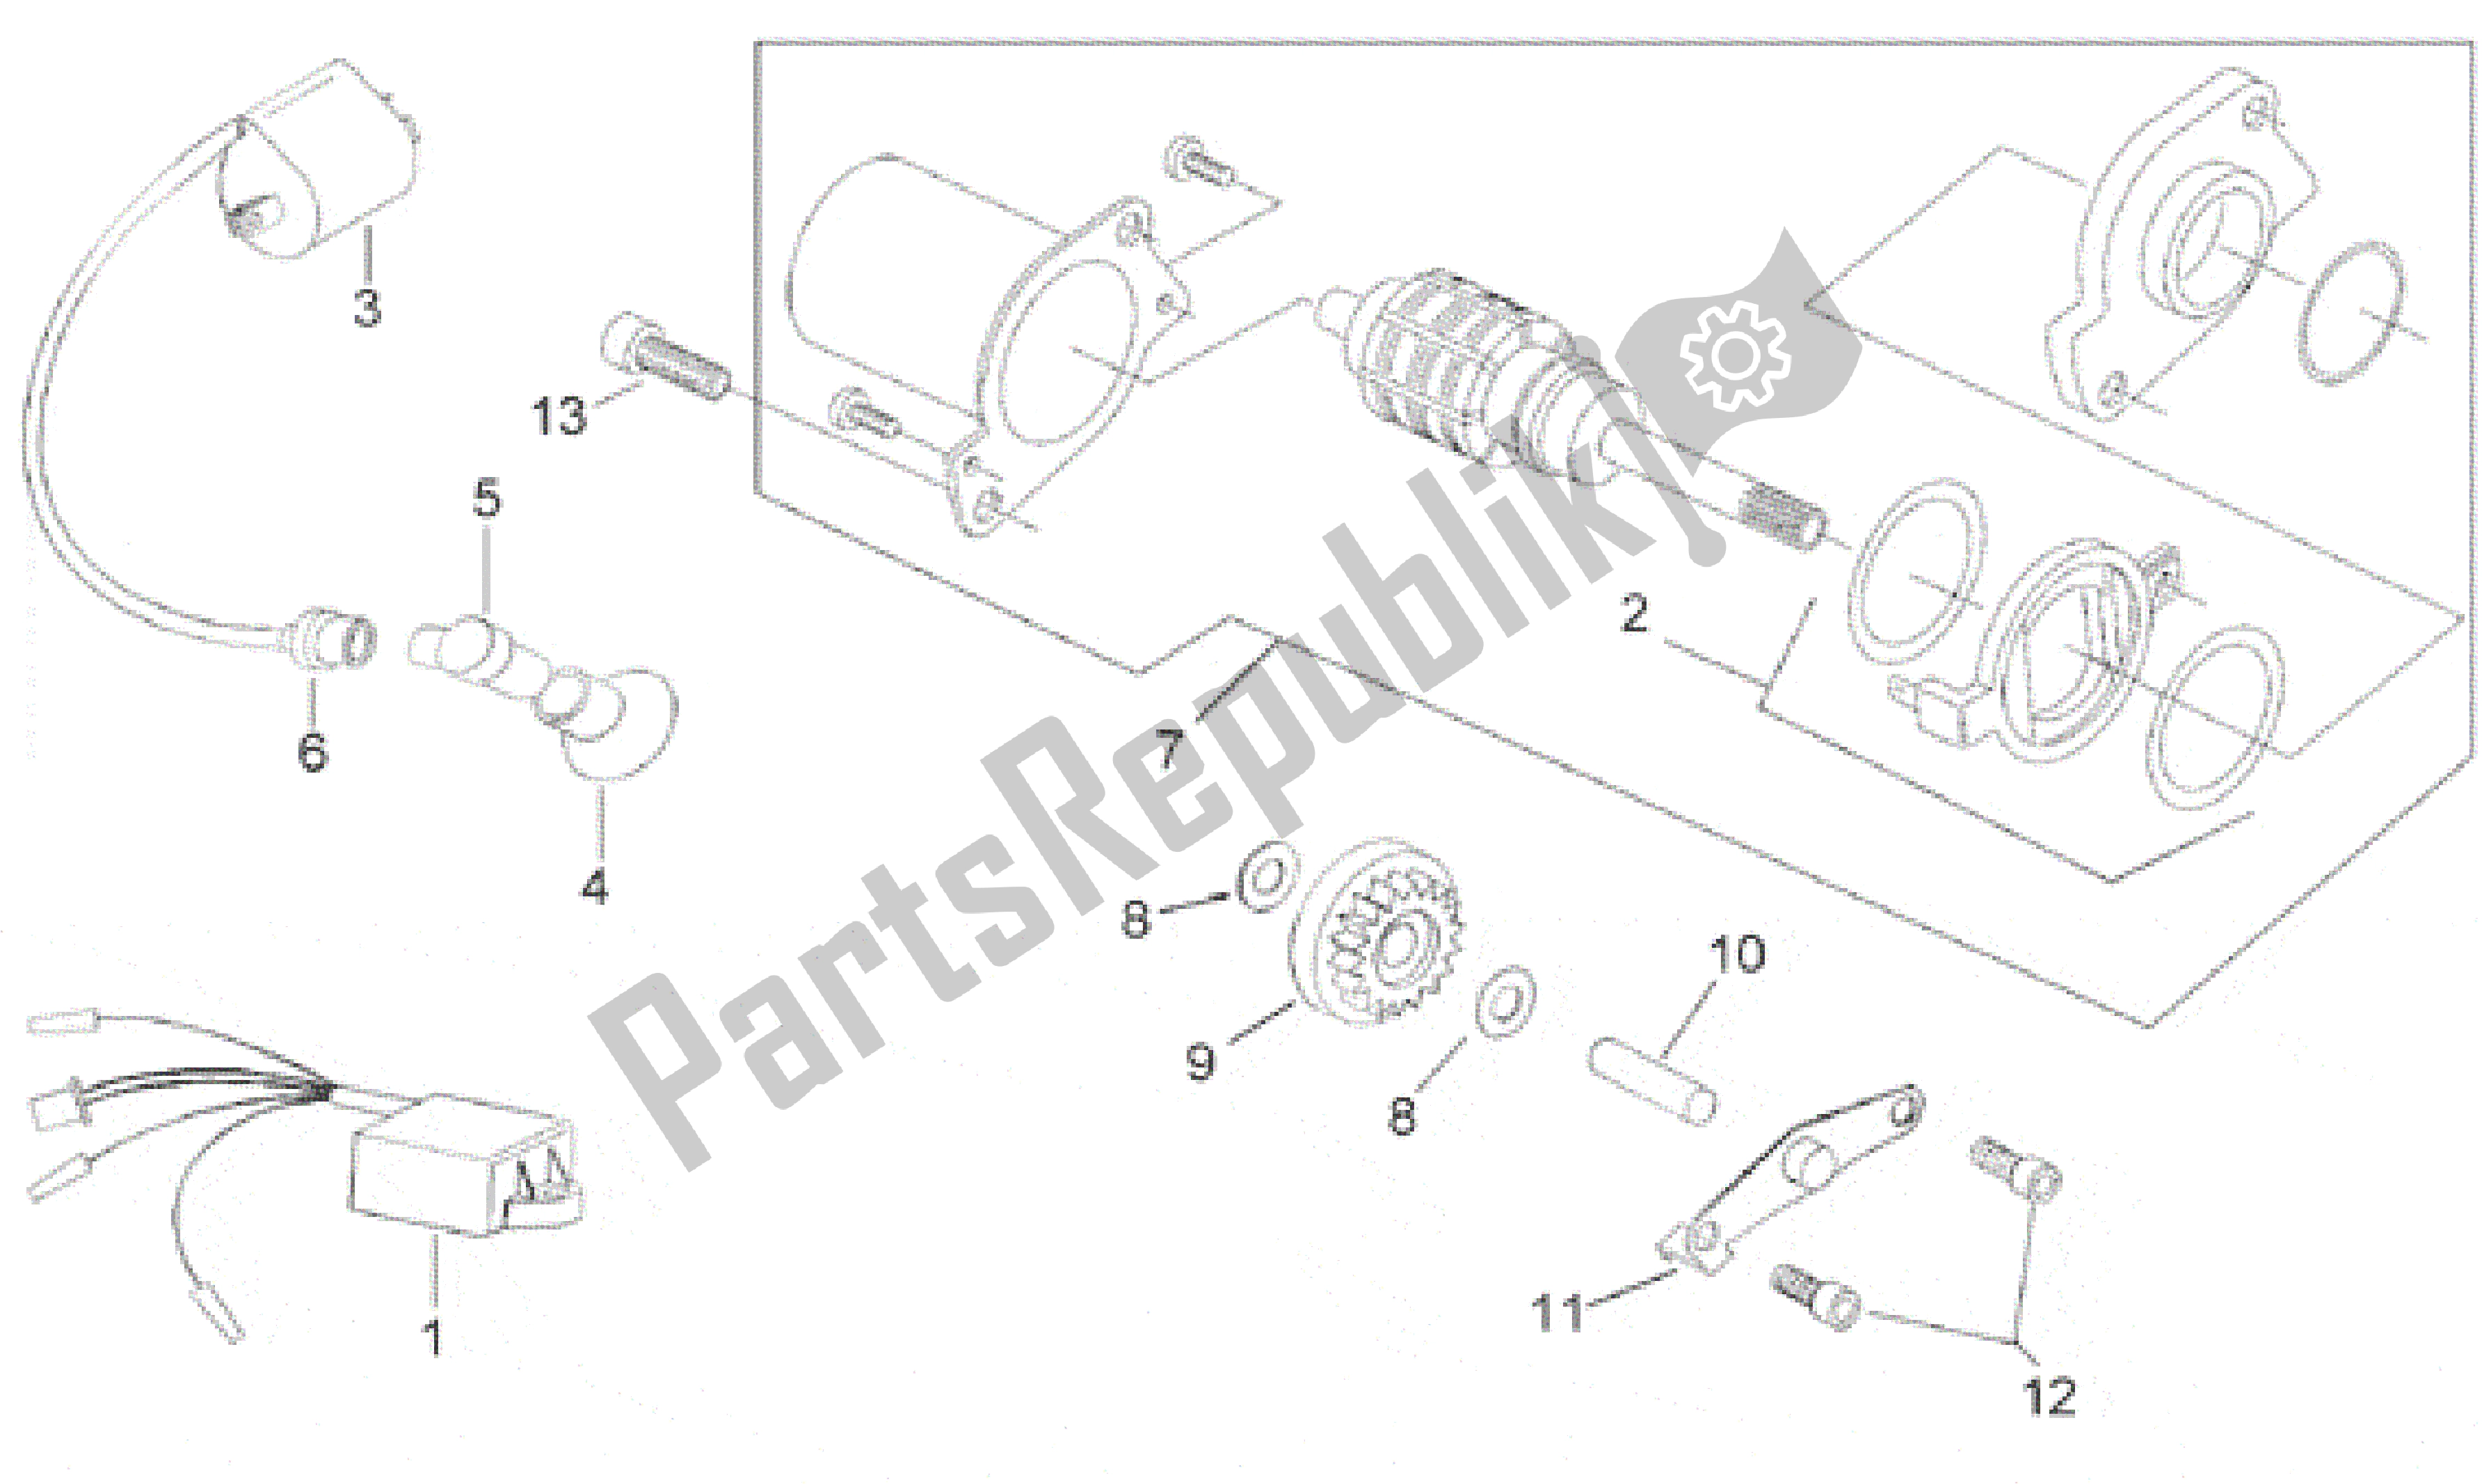 All parts for the Ignition Unit of the Aprilia Scarabeo 50 2000 - 2005